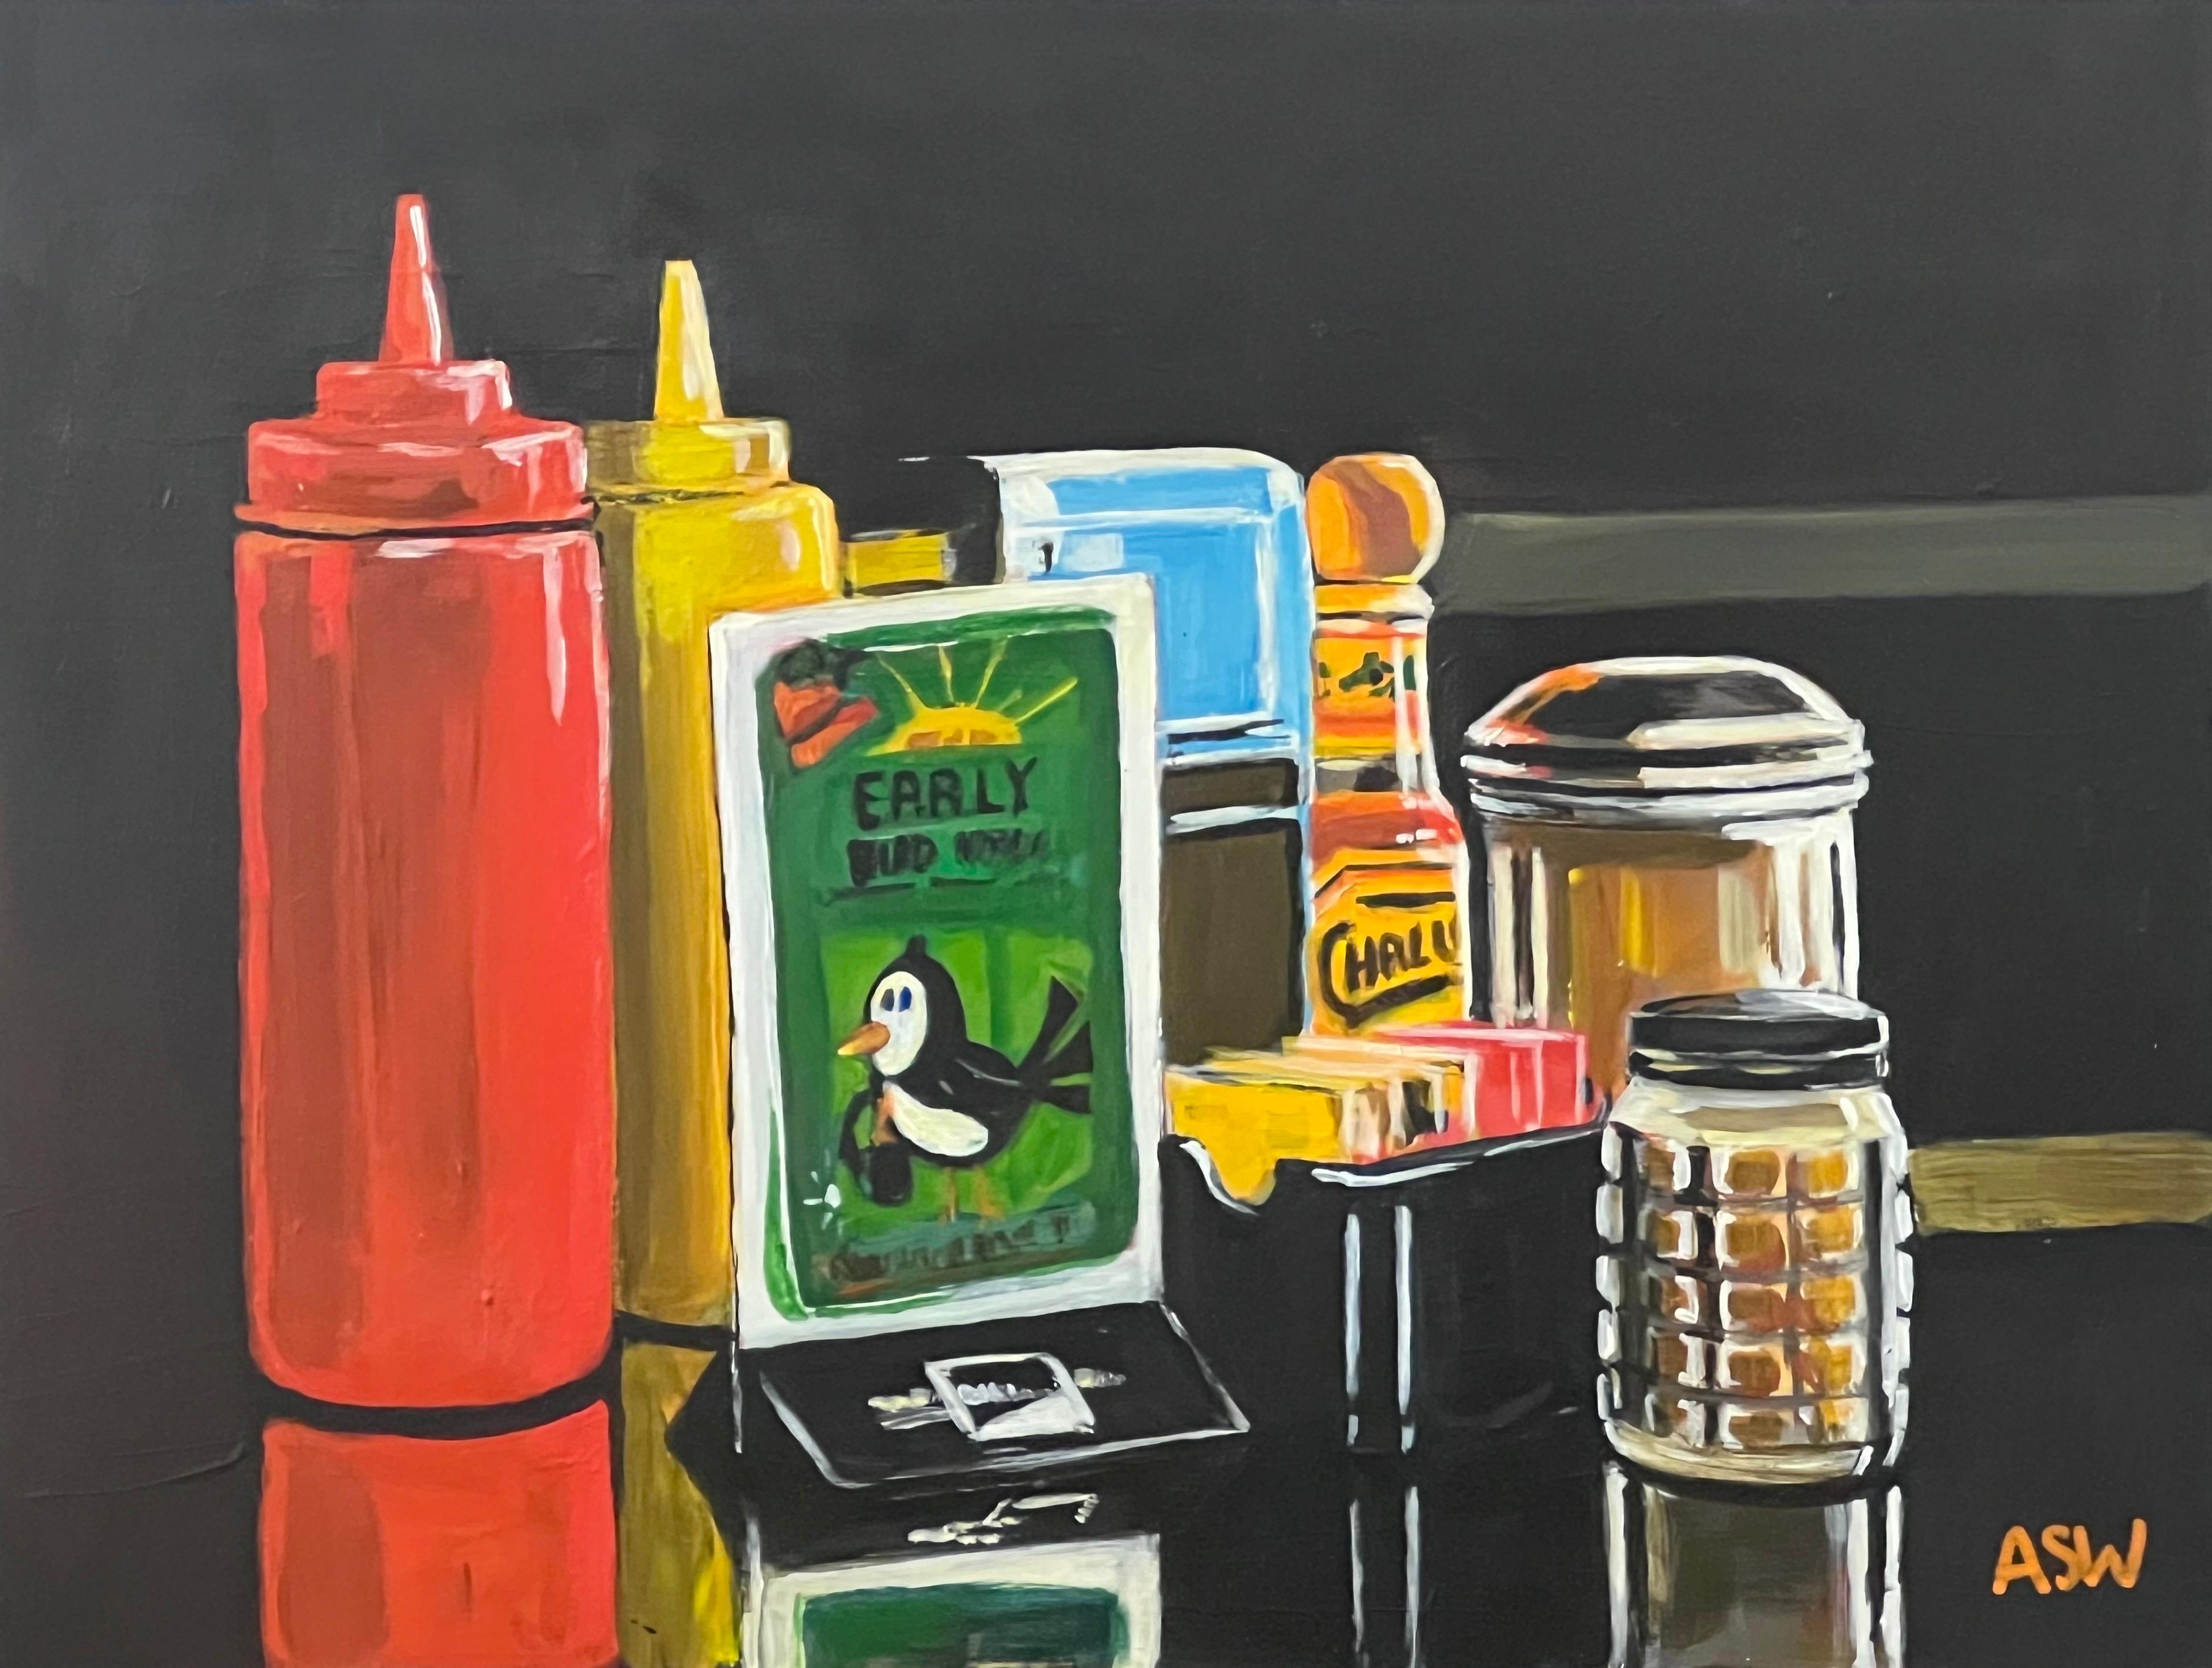 Americana Still Life Painting of American Diner Table Condiments & Sauces Art by Leading British Urban Painter, Angela Wakefield

Art measures 12 x 9 inches
Frame measures 17 x 14 inches

Angela Wakefield has twice been on the front cover of ‘Art of